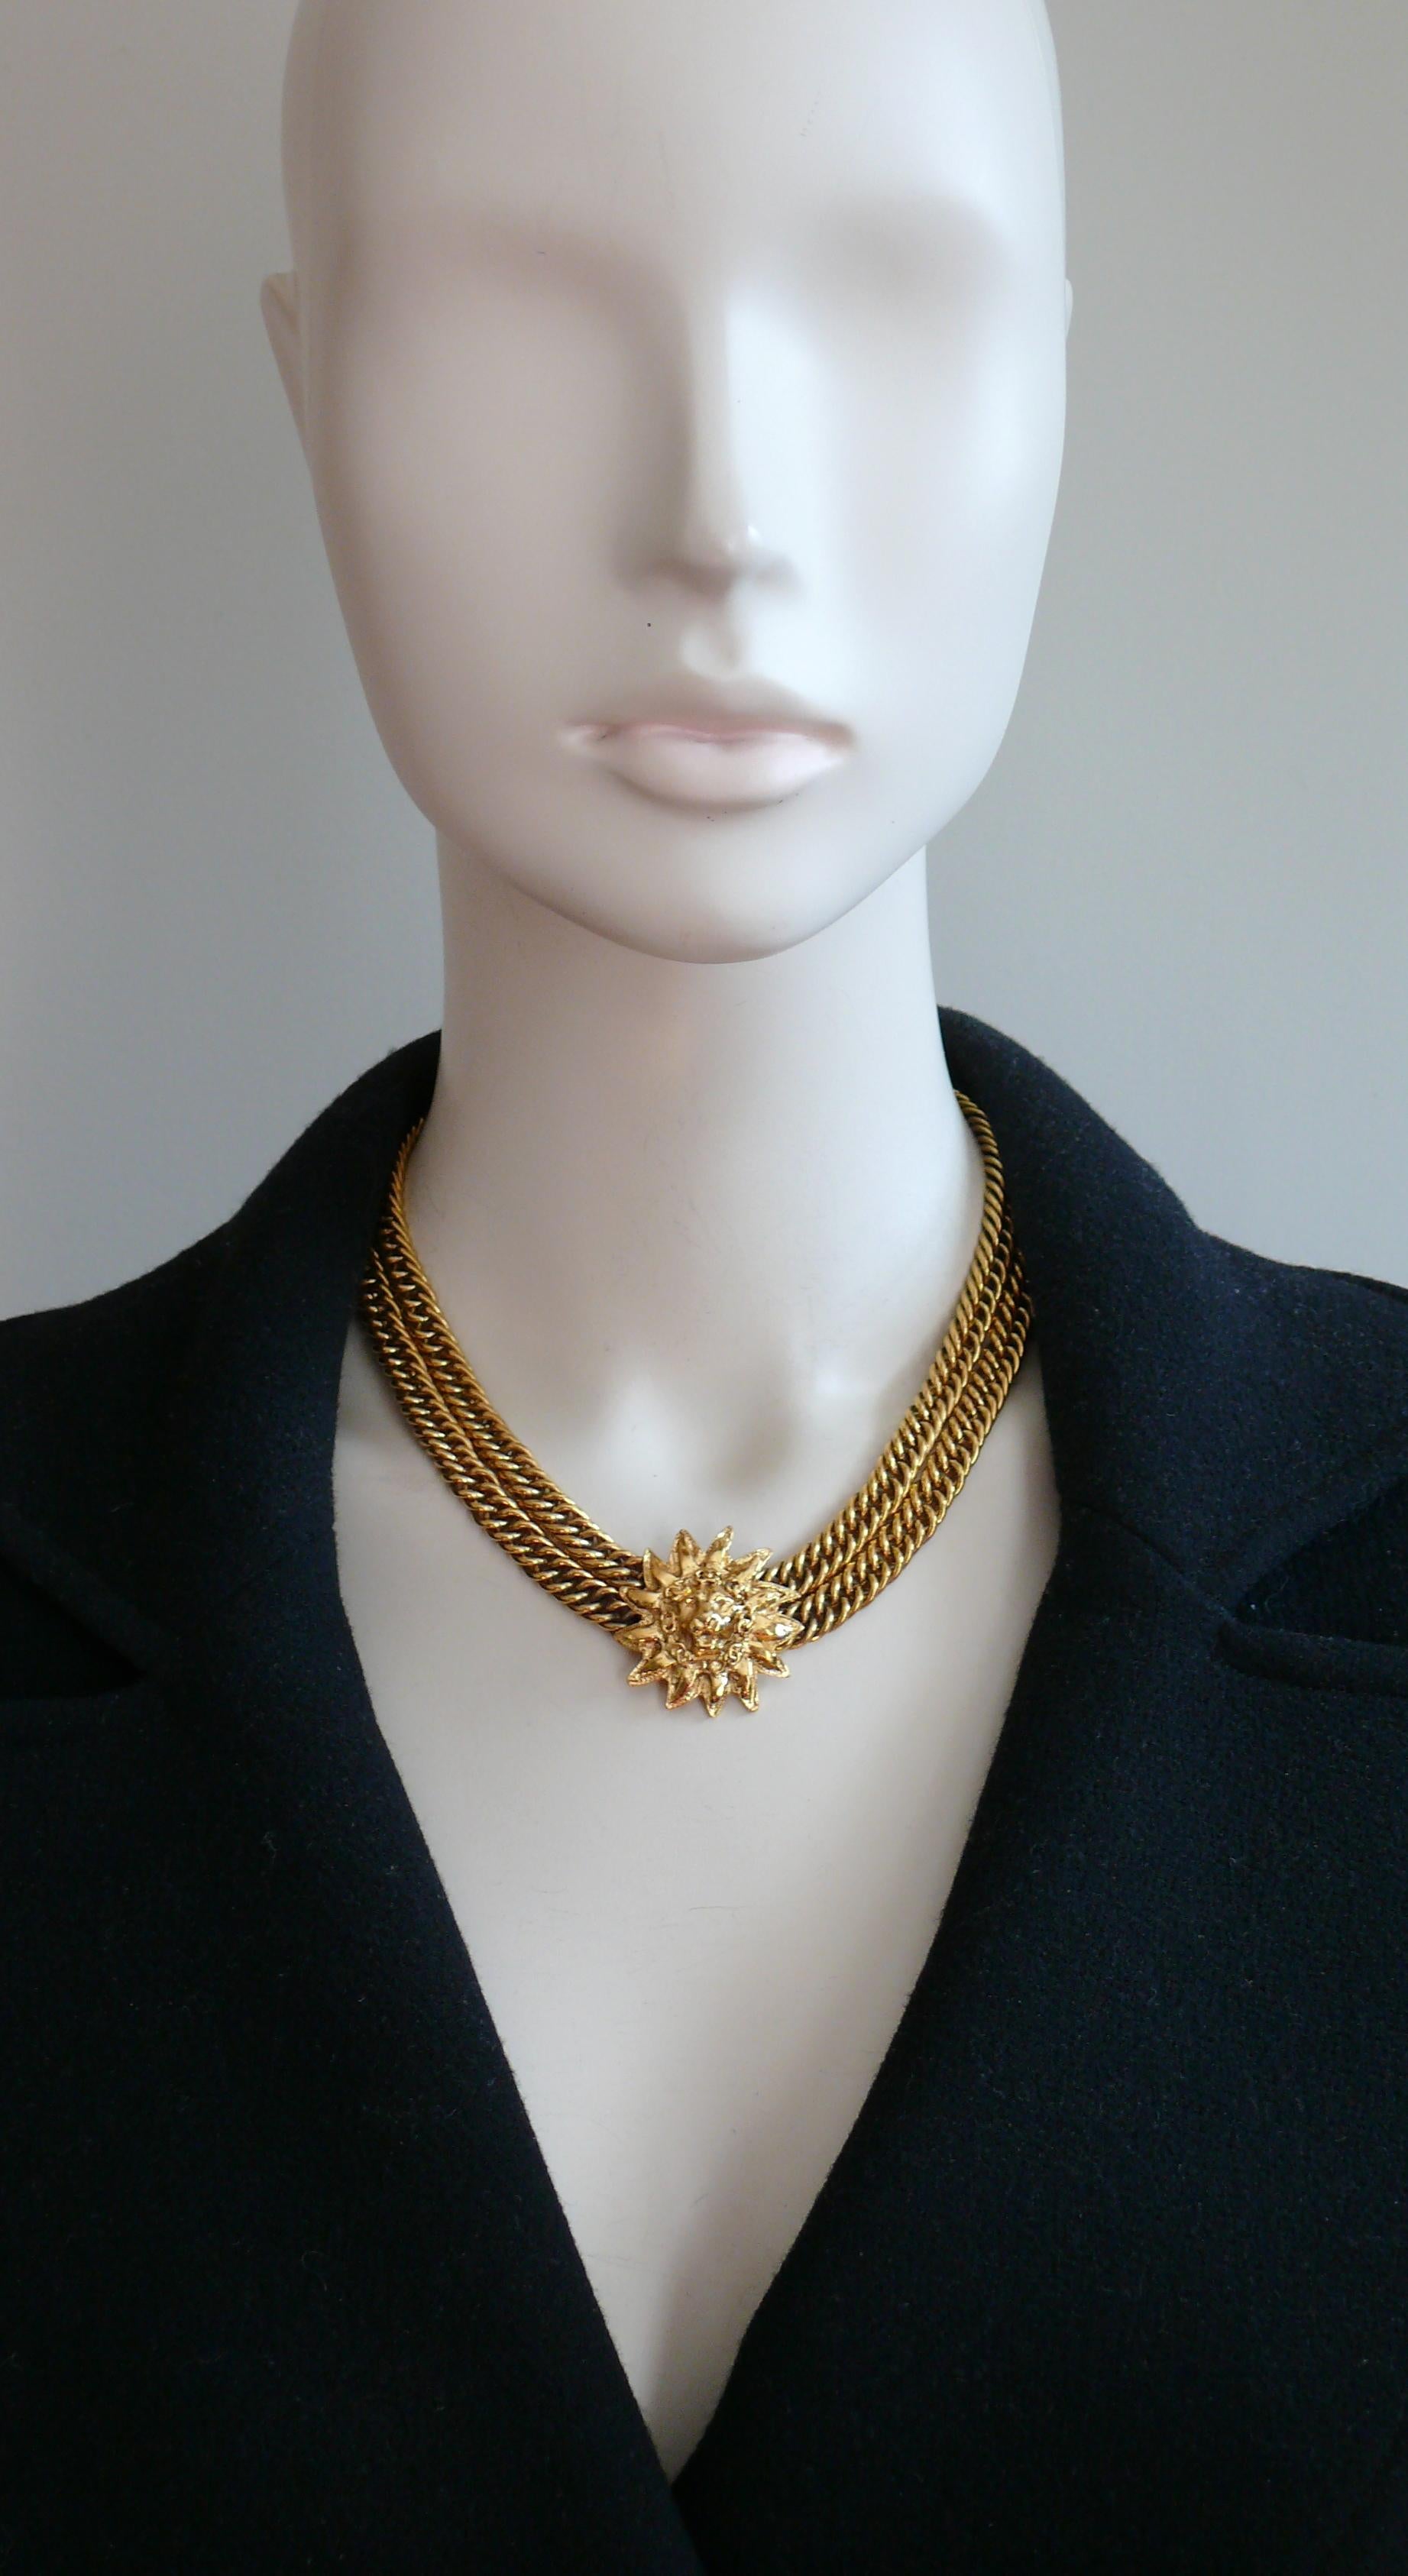 CHANEL vintage gold toned double curb chain necklace featuring an iconic 3D sunburst lion head central medallion adorned by CC logos.

A classic CHANEL iconic piece of jewelry.

Hook and eye closure.

Embossed CHANEL Made in France.

Indicative